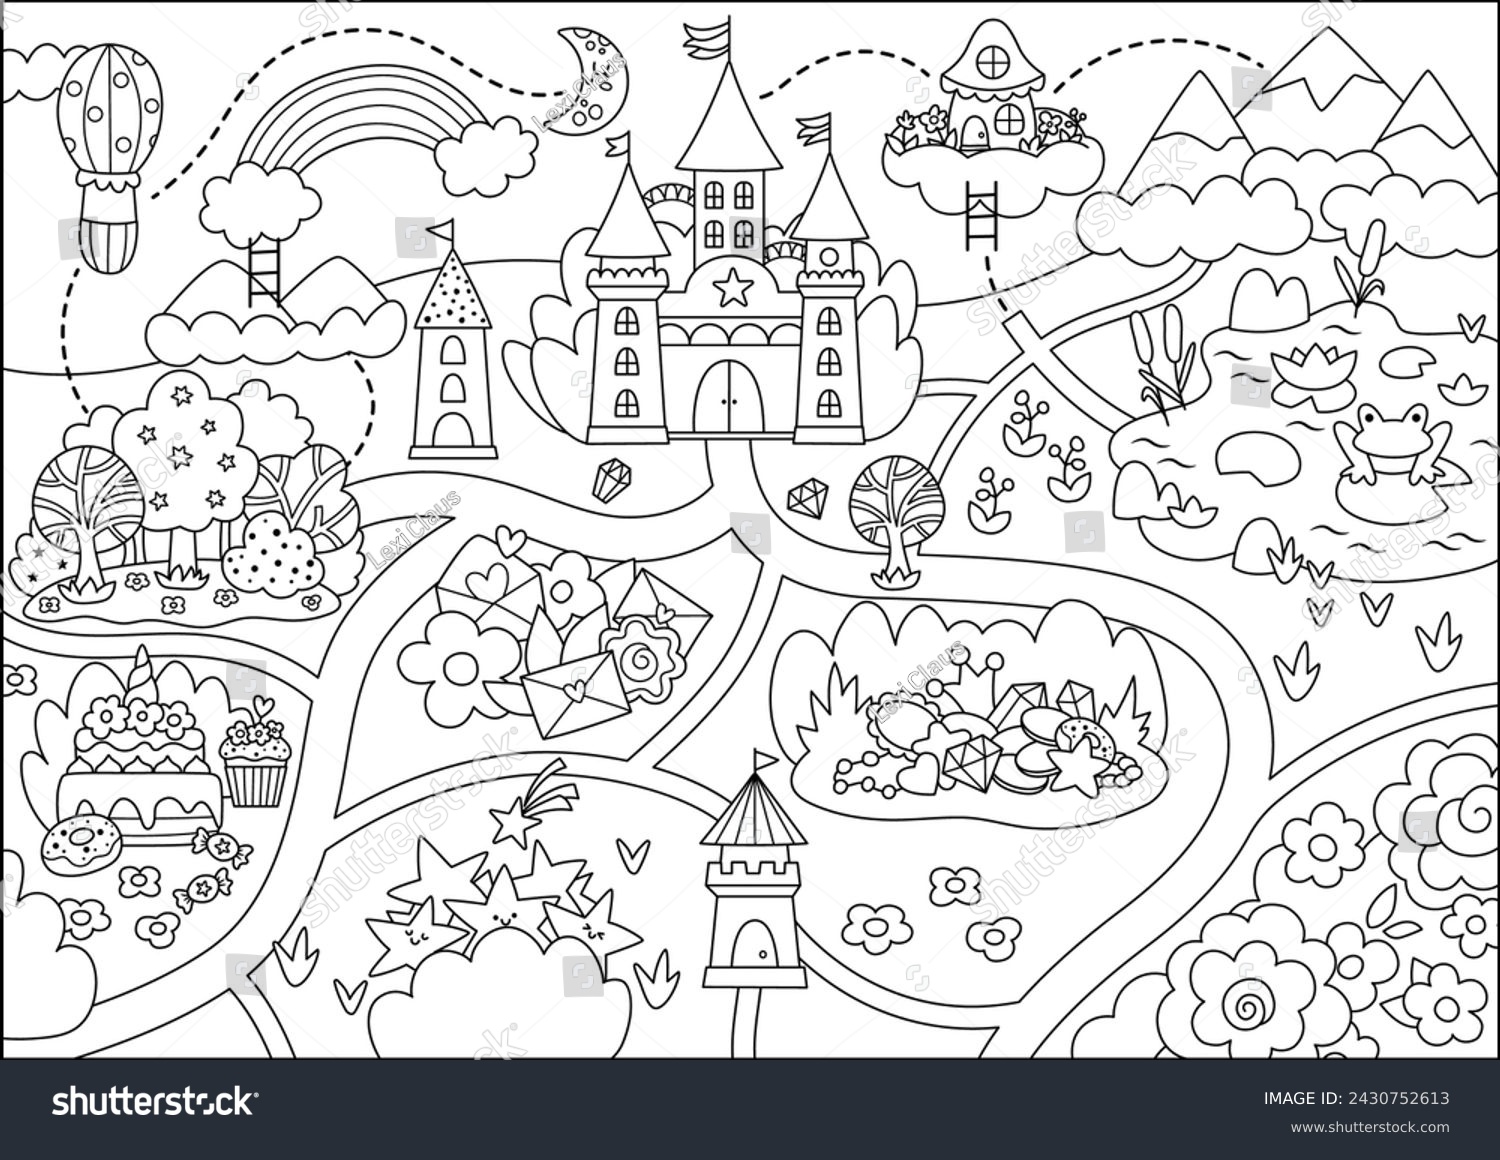 SVG of Unicorn black and white village map. Fairytale line background. Vector magic country coloring page with castle, rainbow, forest, pond, road. Fantasy world plan with fallen stars, treasures, sweets
 svg